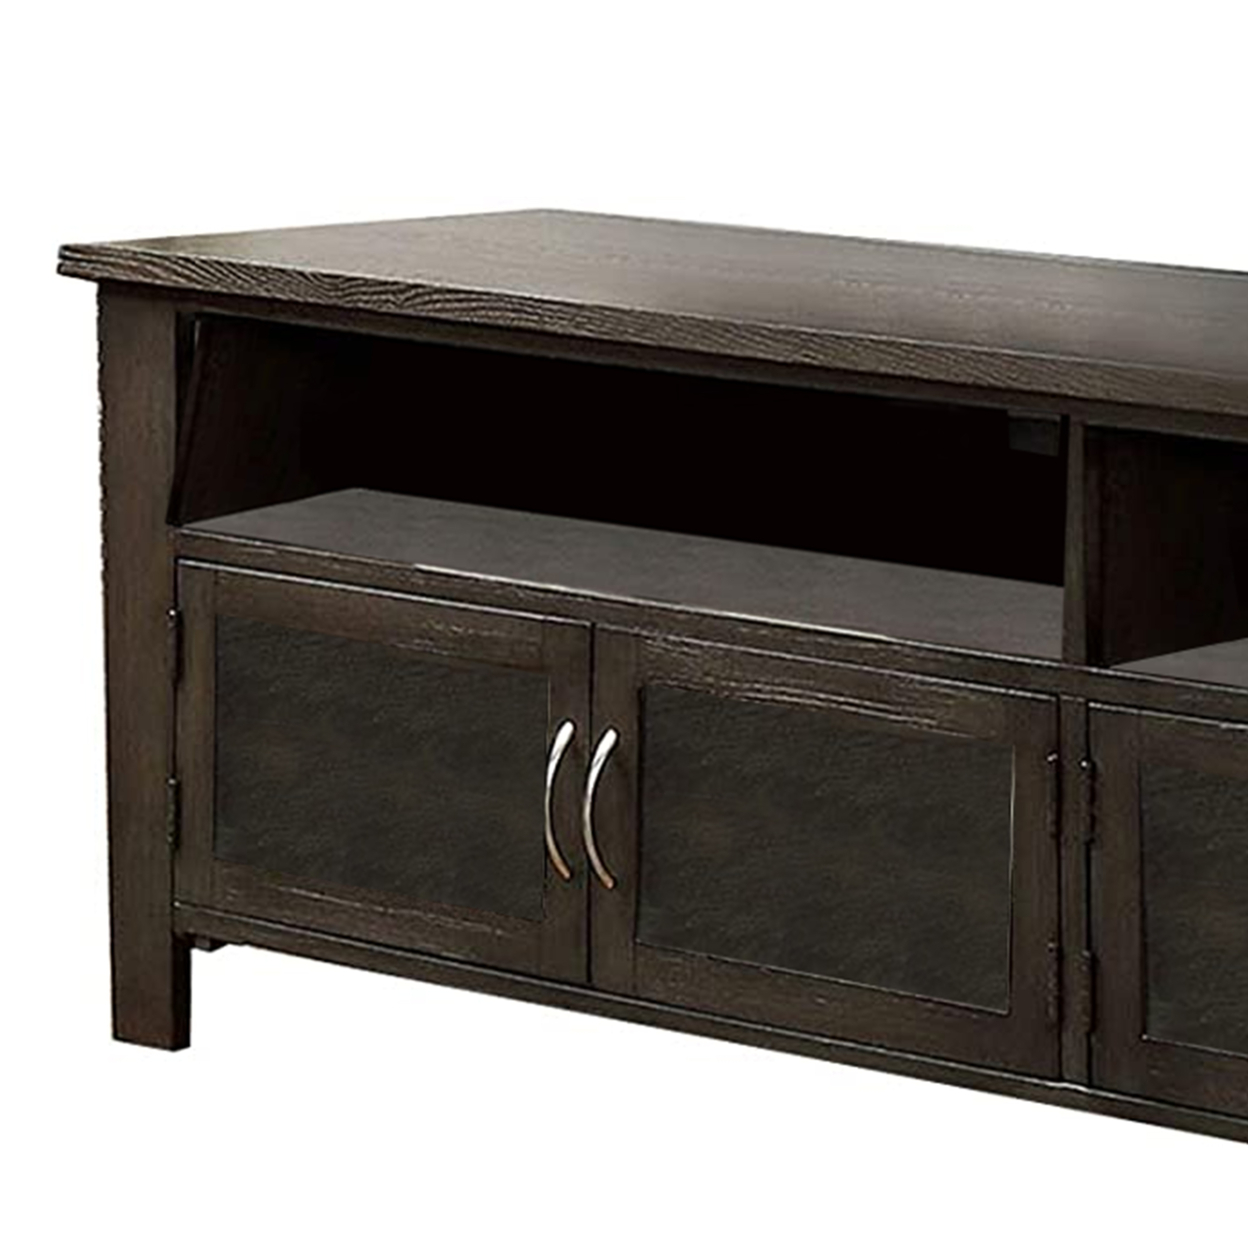 72 Wooden TV Stand With 2 Cabinets And 2 Open Shelves In Brown- Saltoro Sherpi